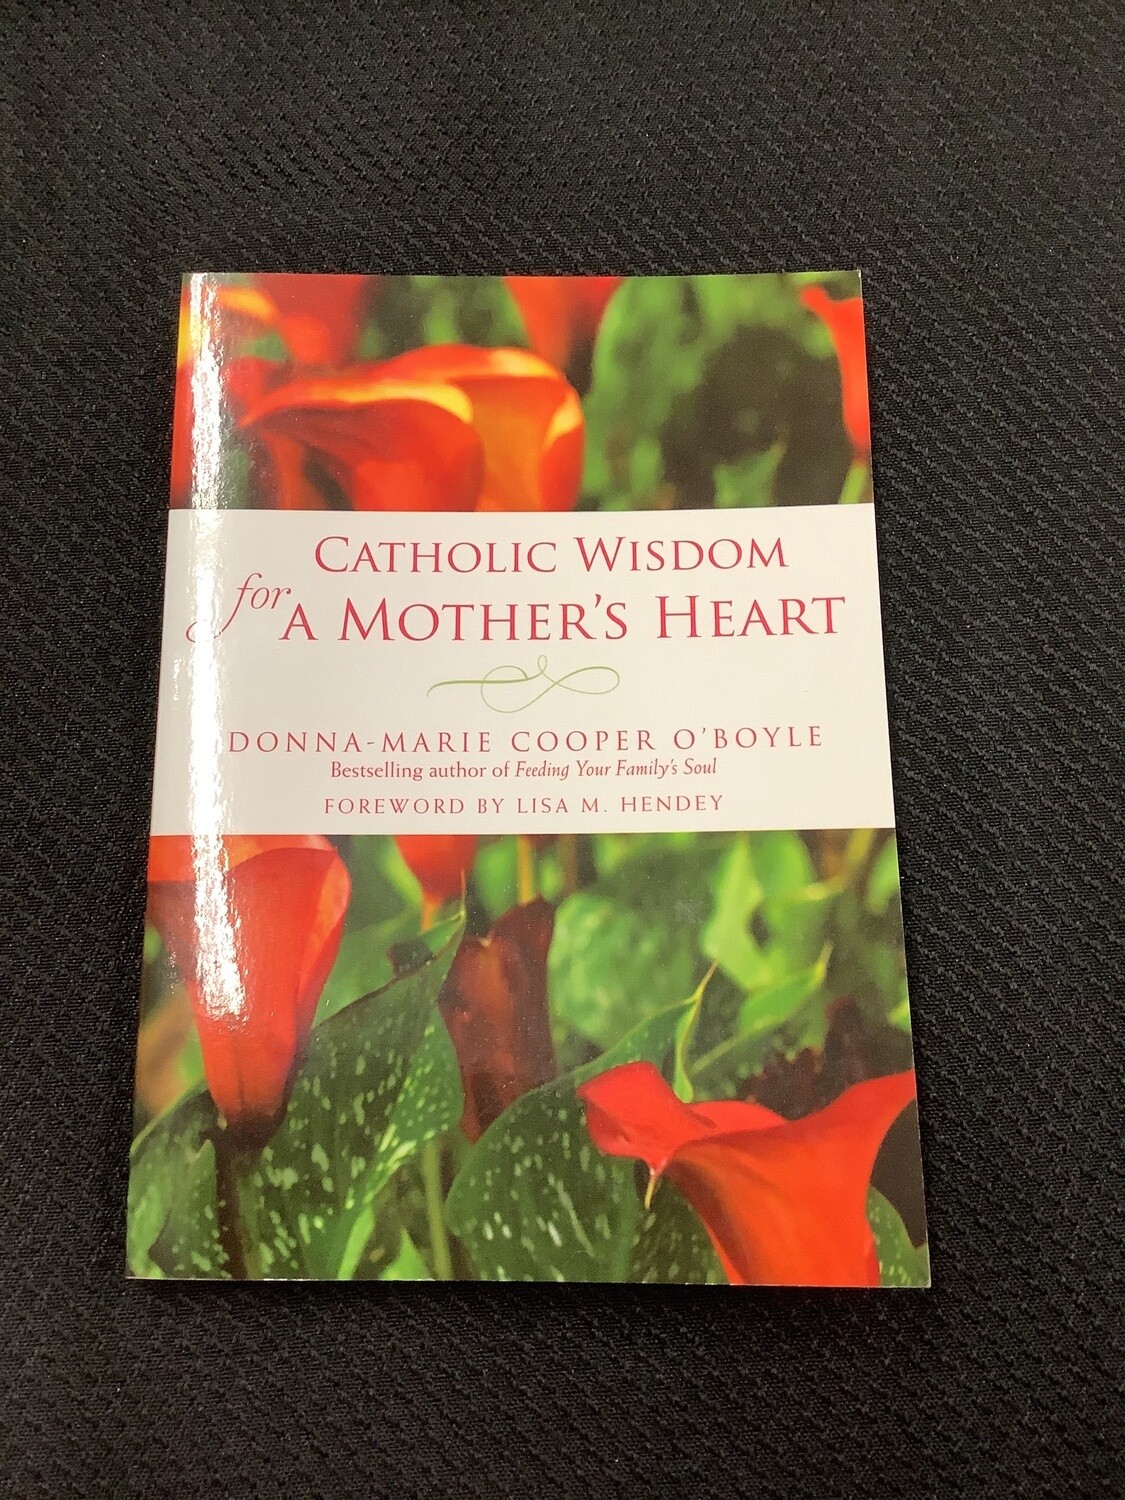 Catholic Wisdom For A Mothers Heart - Donna-Marie Cooper O’Boyle